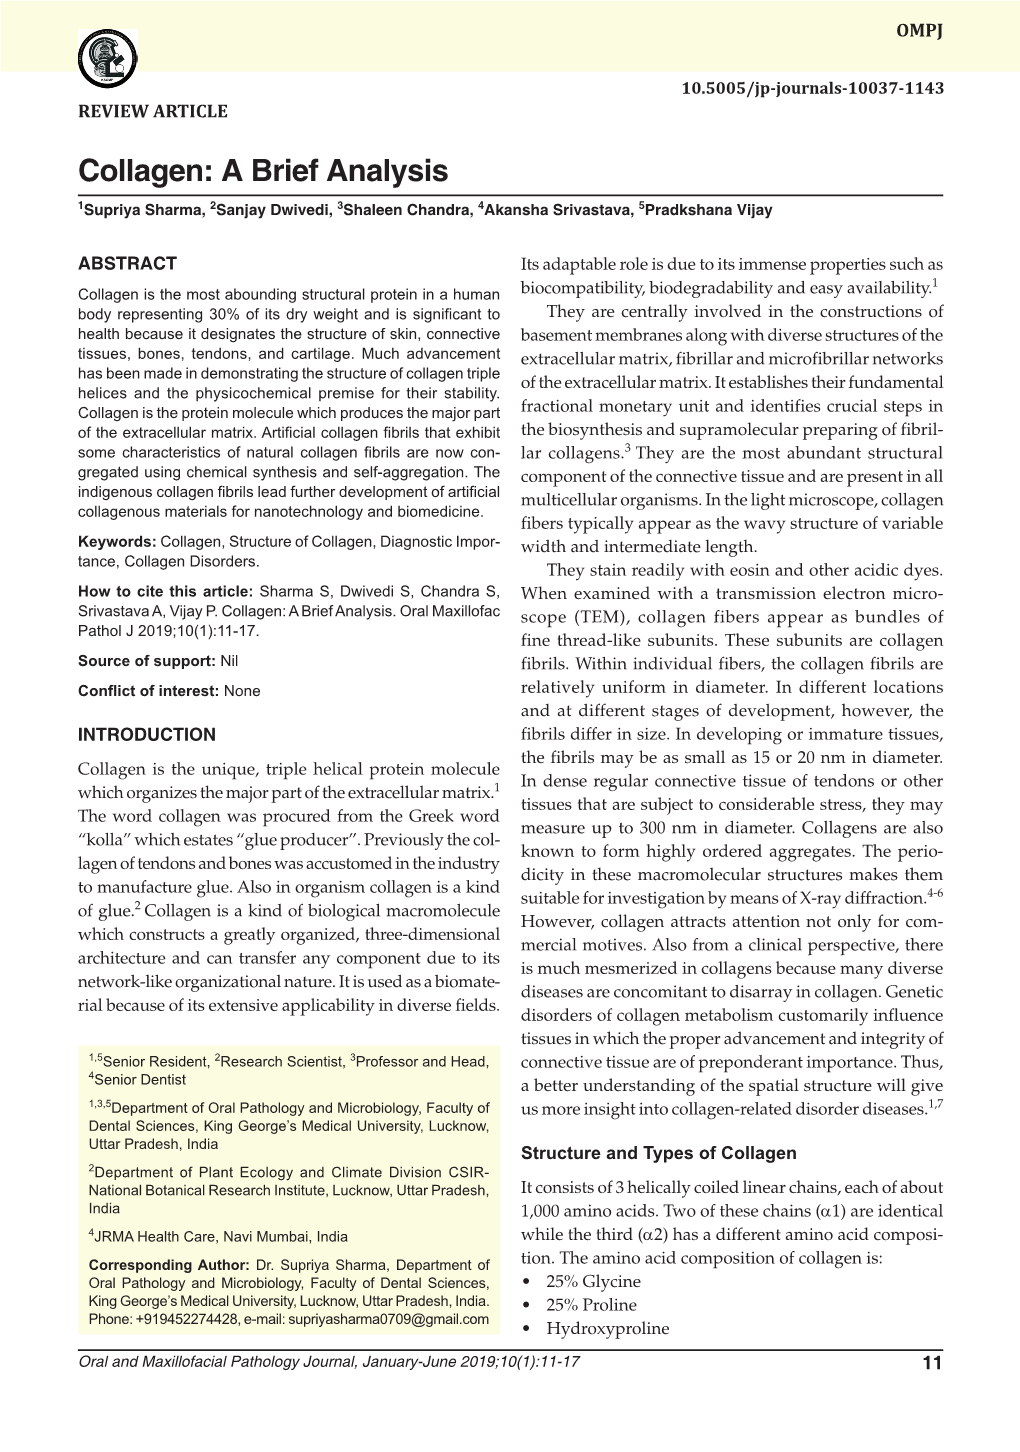 Collagen: a Brief Analysis REVIEW ARTICLE